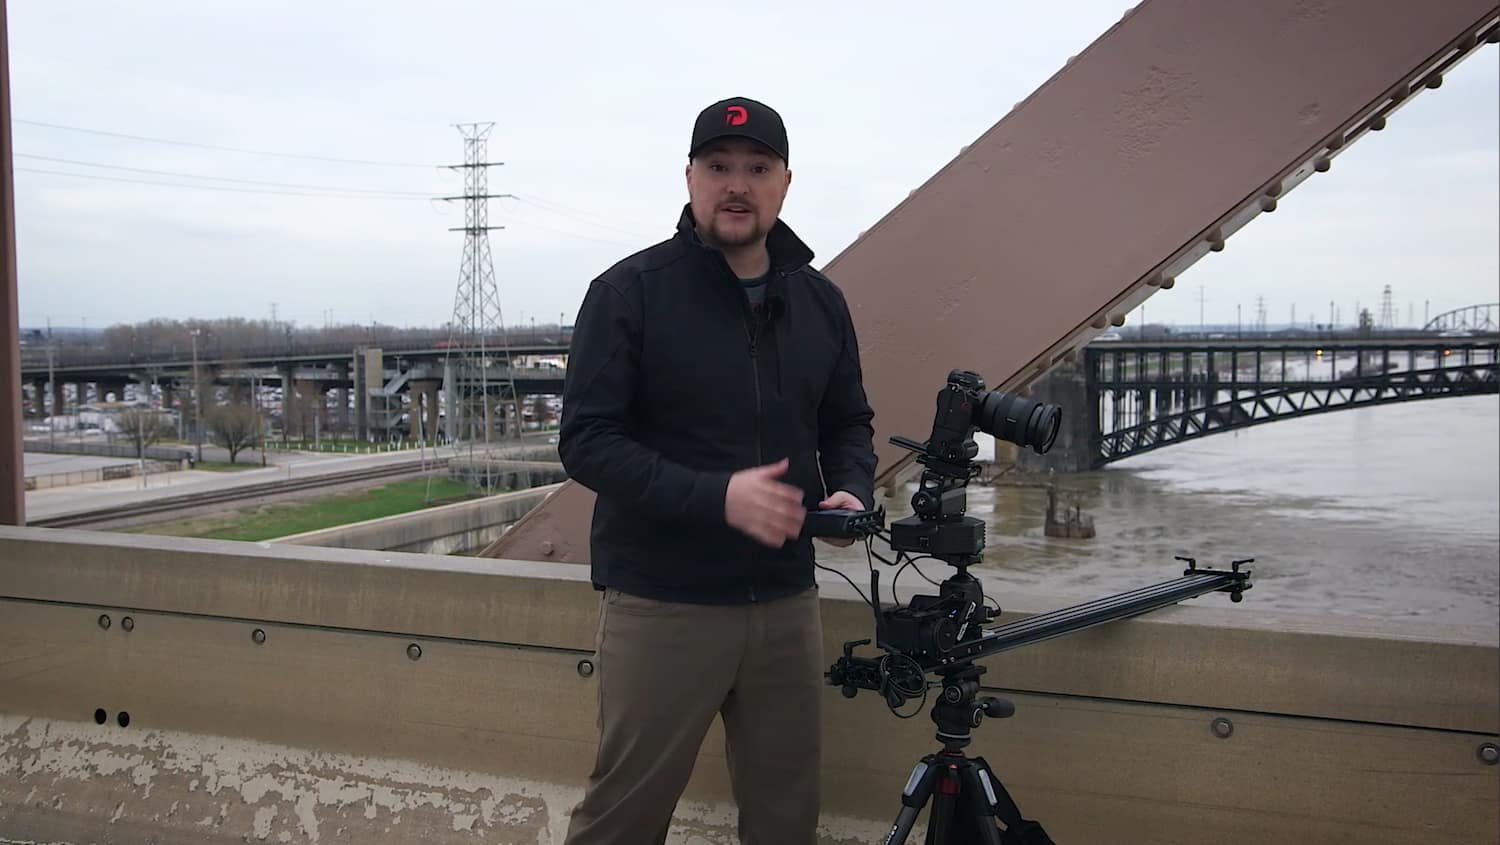 Time-Lapse Photography & Editing with Drew Geraci - | PRO EDU Tutorial shooting on a bridge